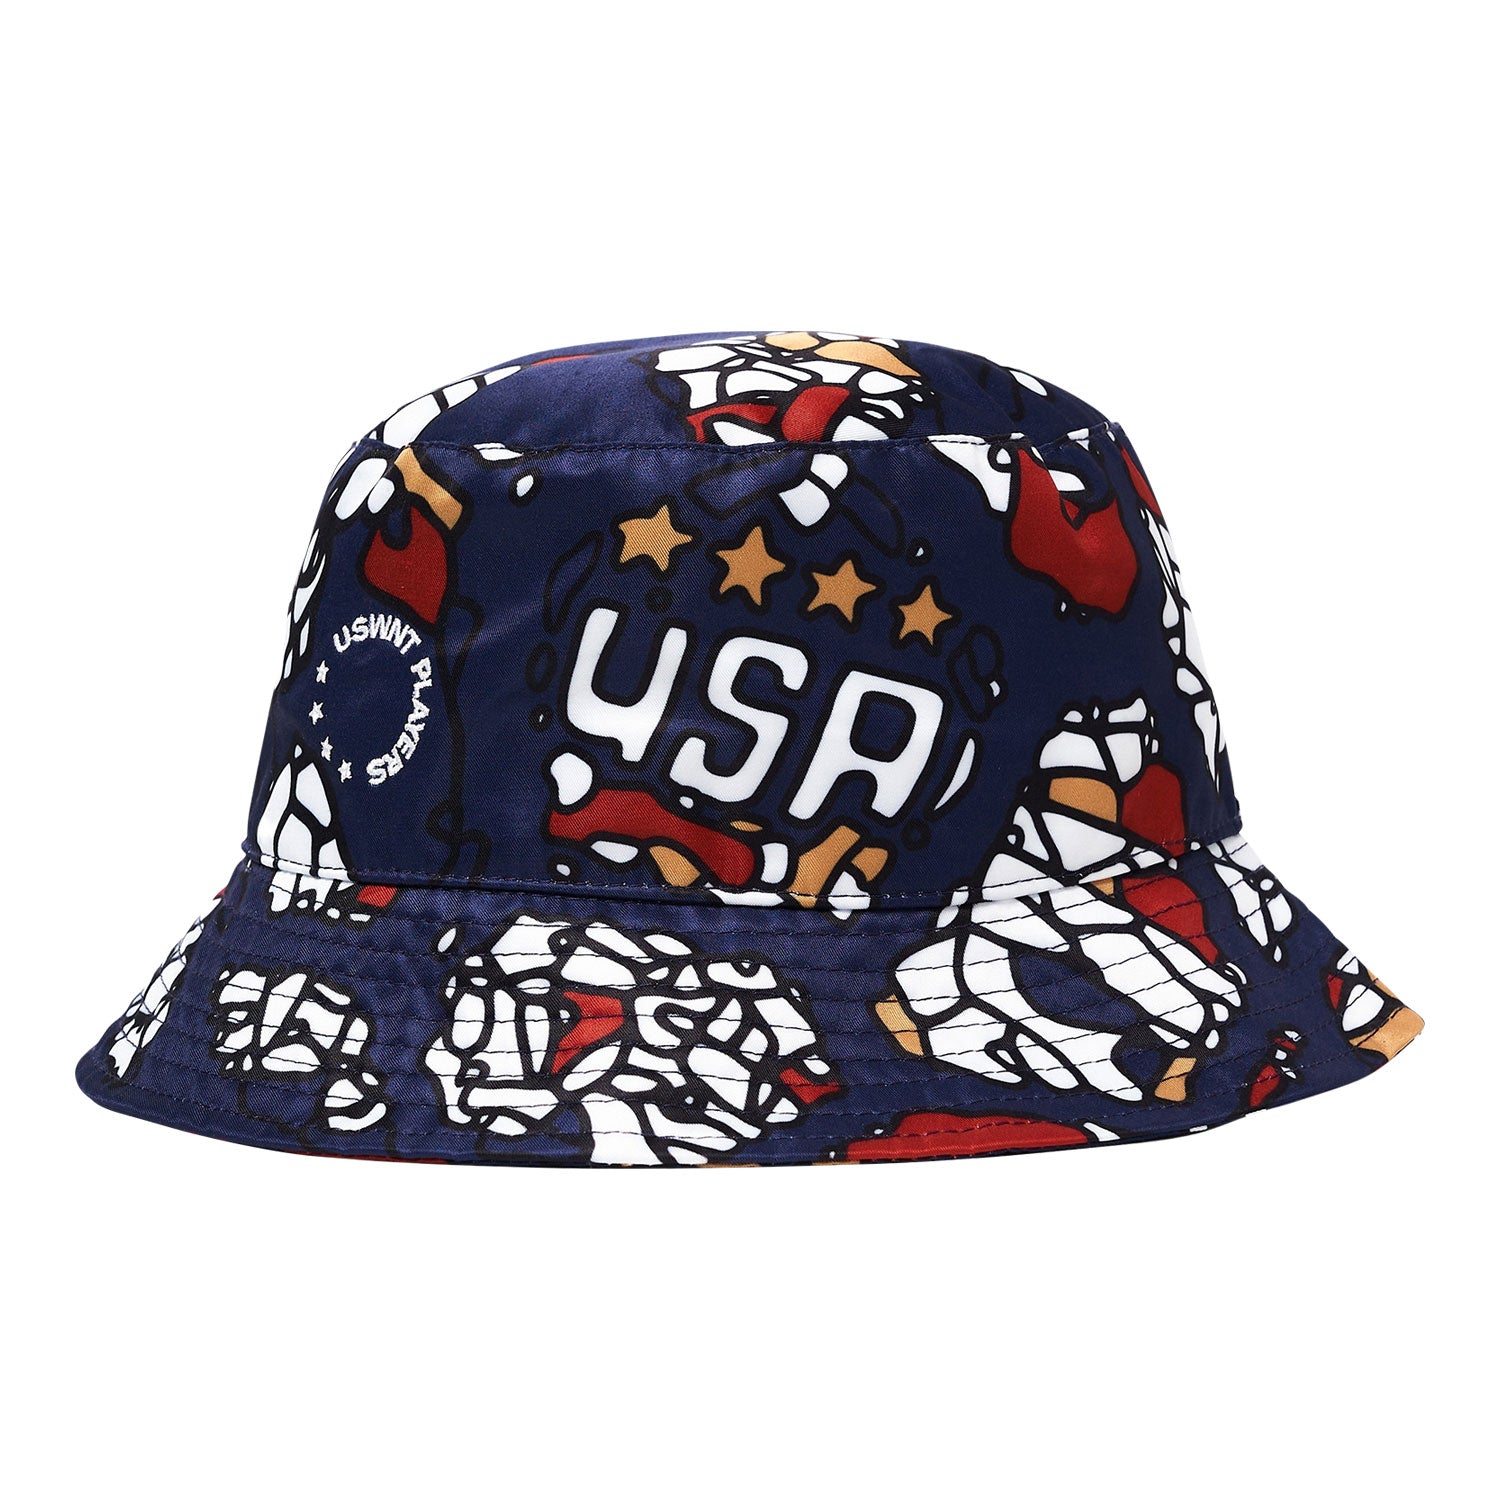 Round21 USWNT Our Time Bucket Hat - Official U.S. Soccer Store